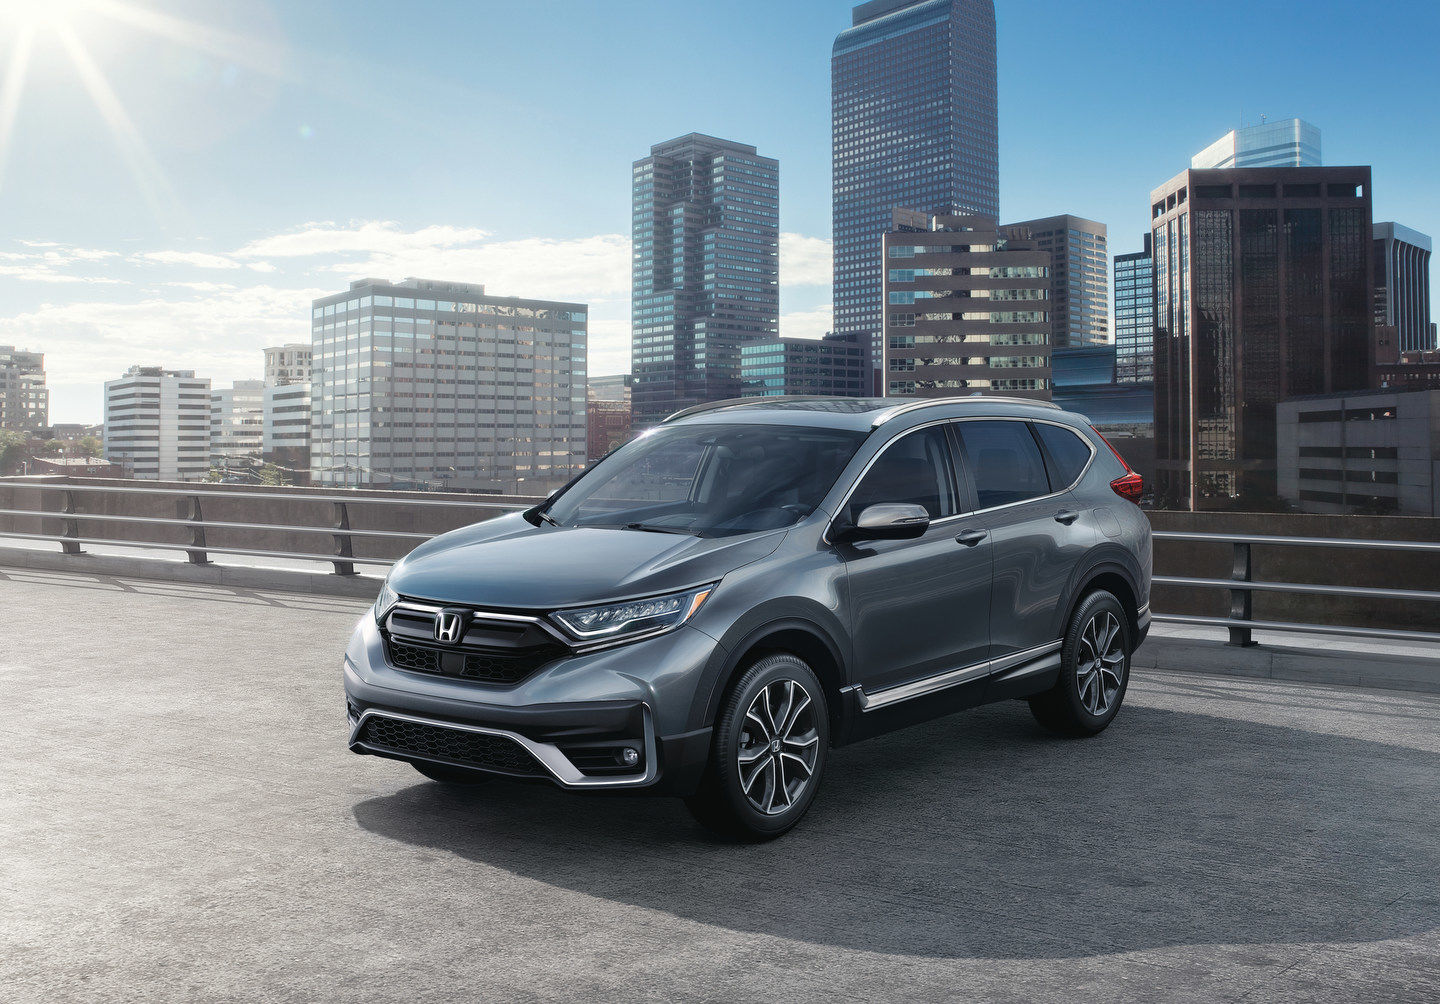 2022 Honda CR-V vs 2022 Subaru Forester: for the whole package